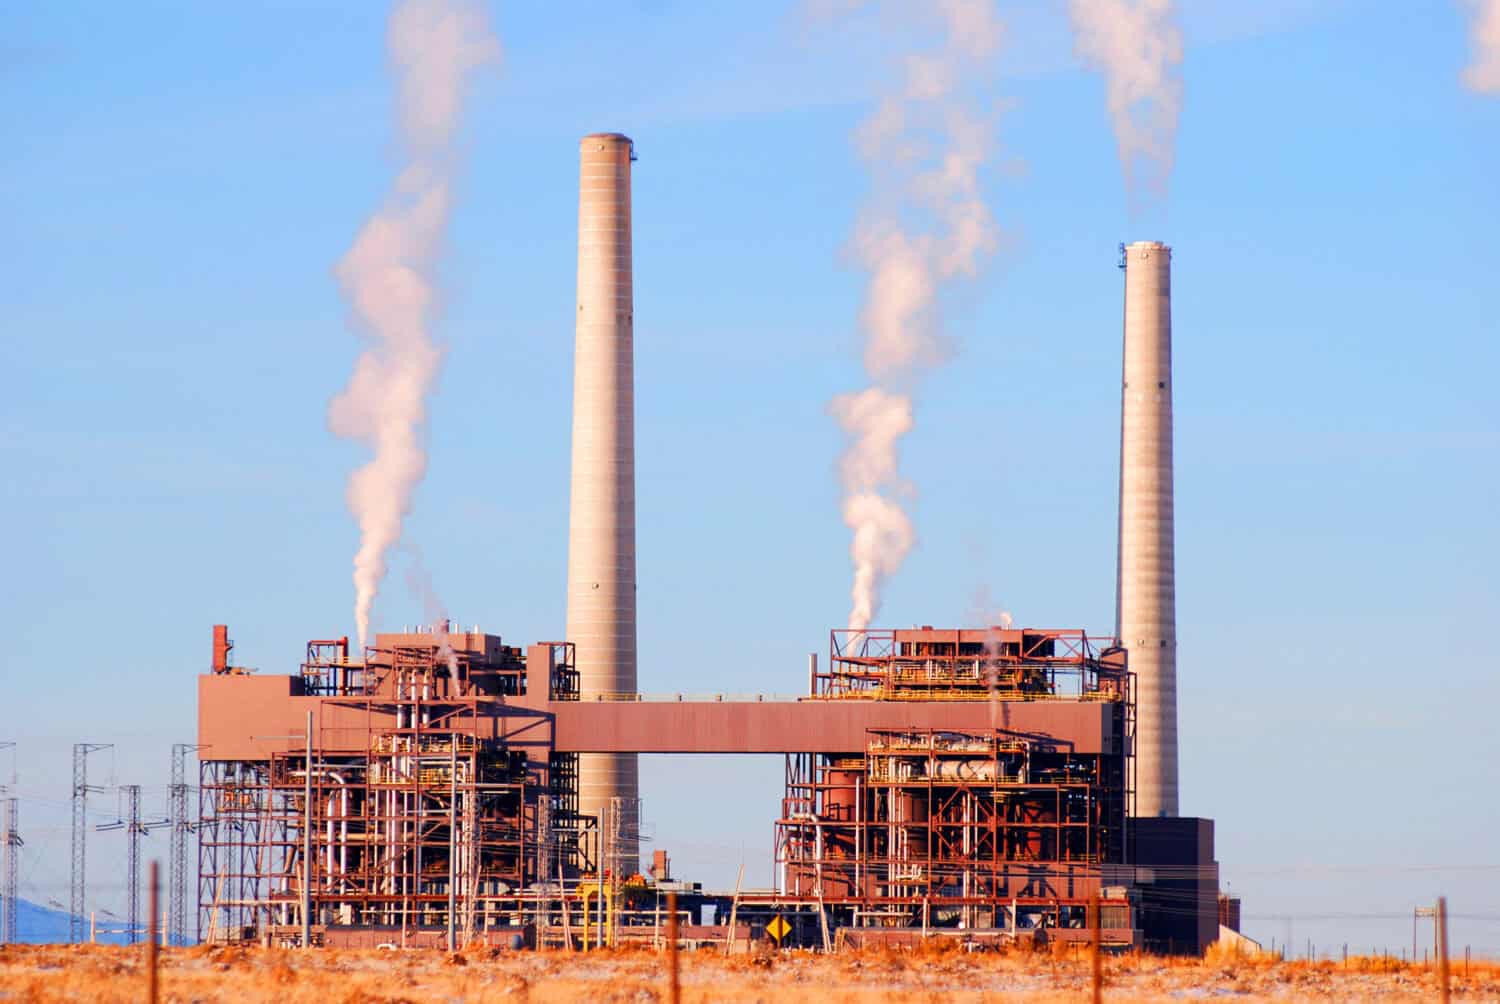 NEVADA, UNITED STATES - December 24, 2009: Power plant with smoke stacks releasing pollution